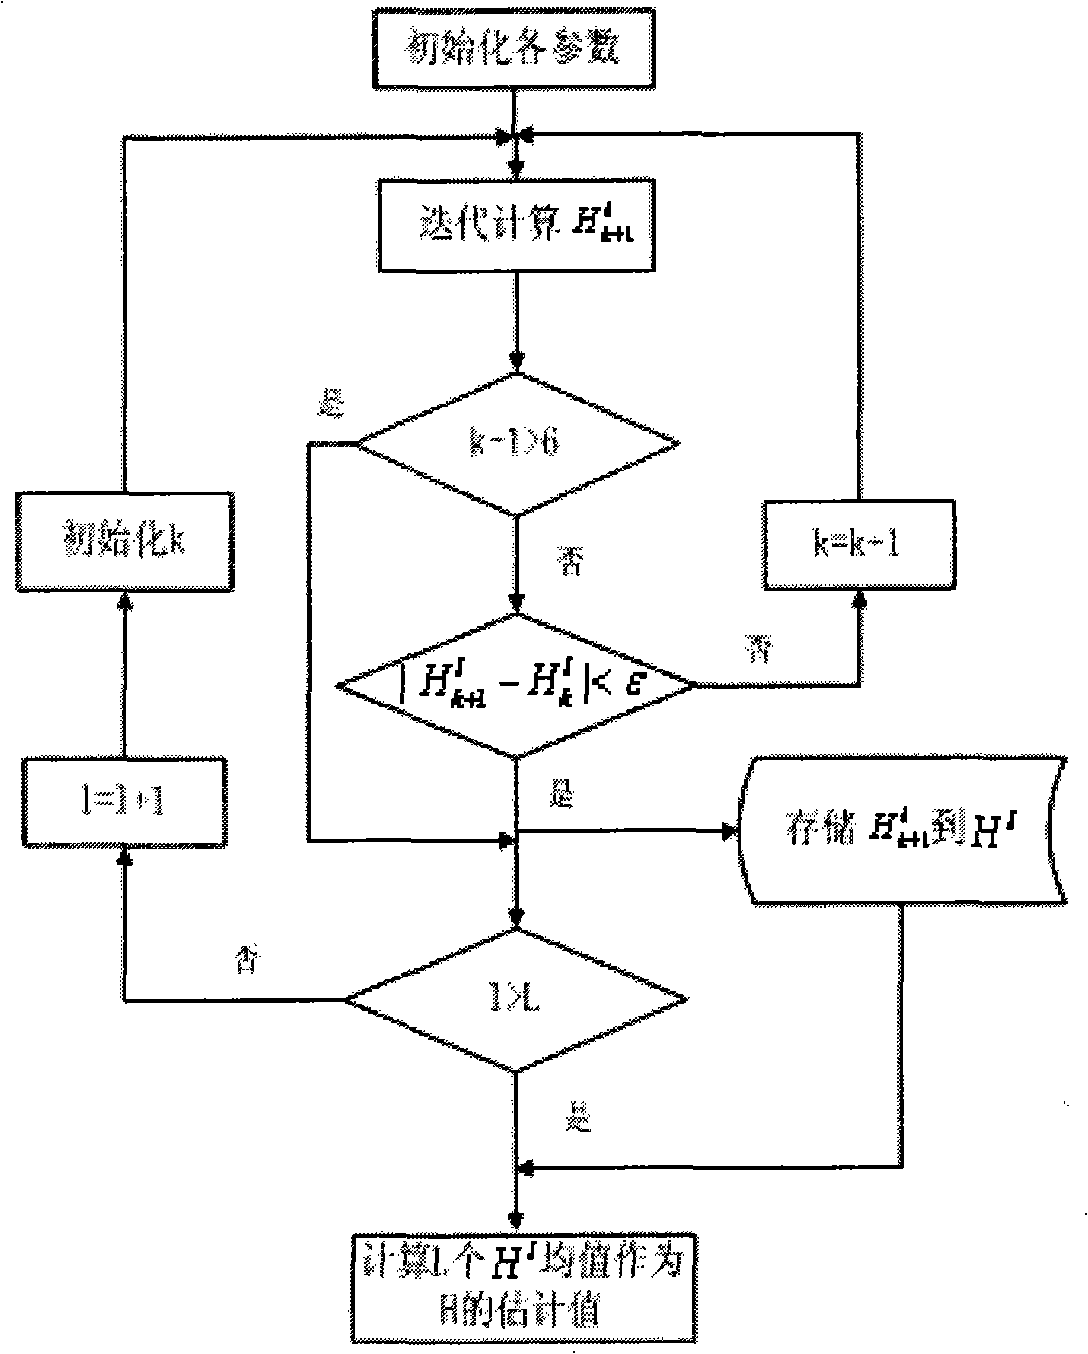 Rapid detection method for network flow anomaly